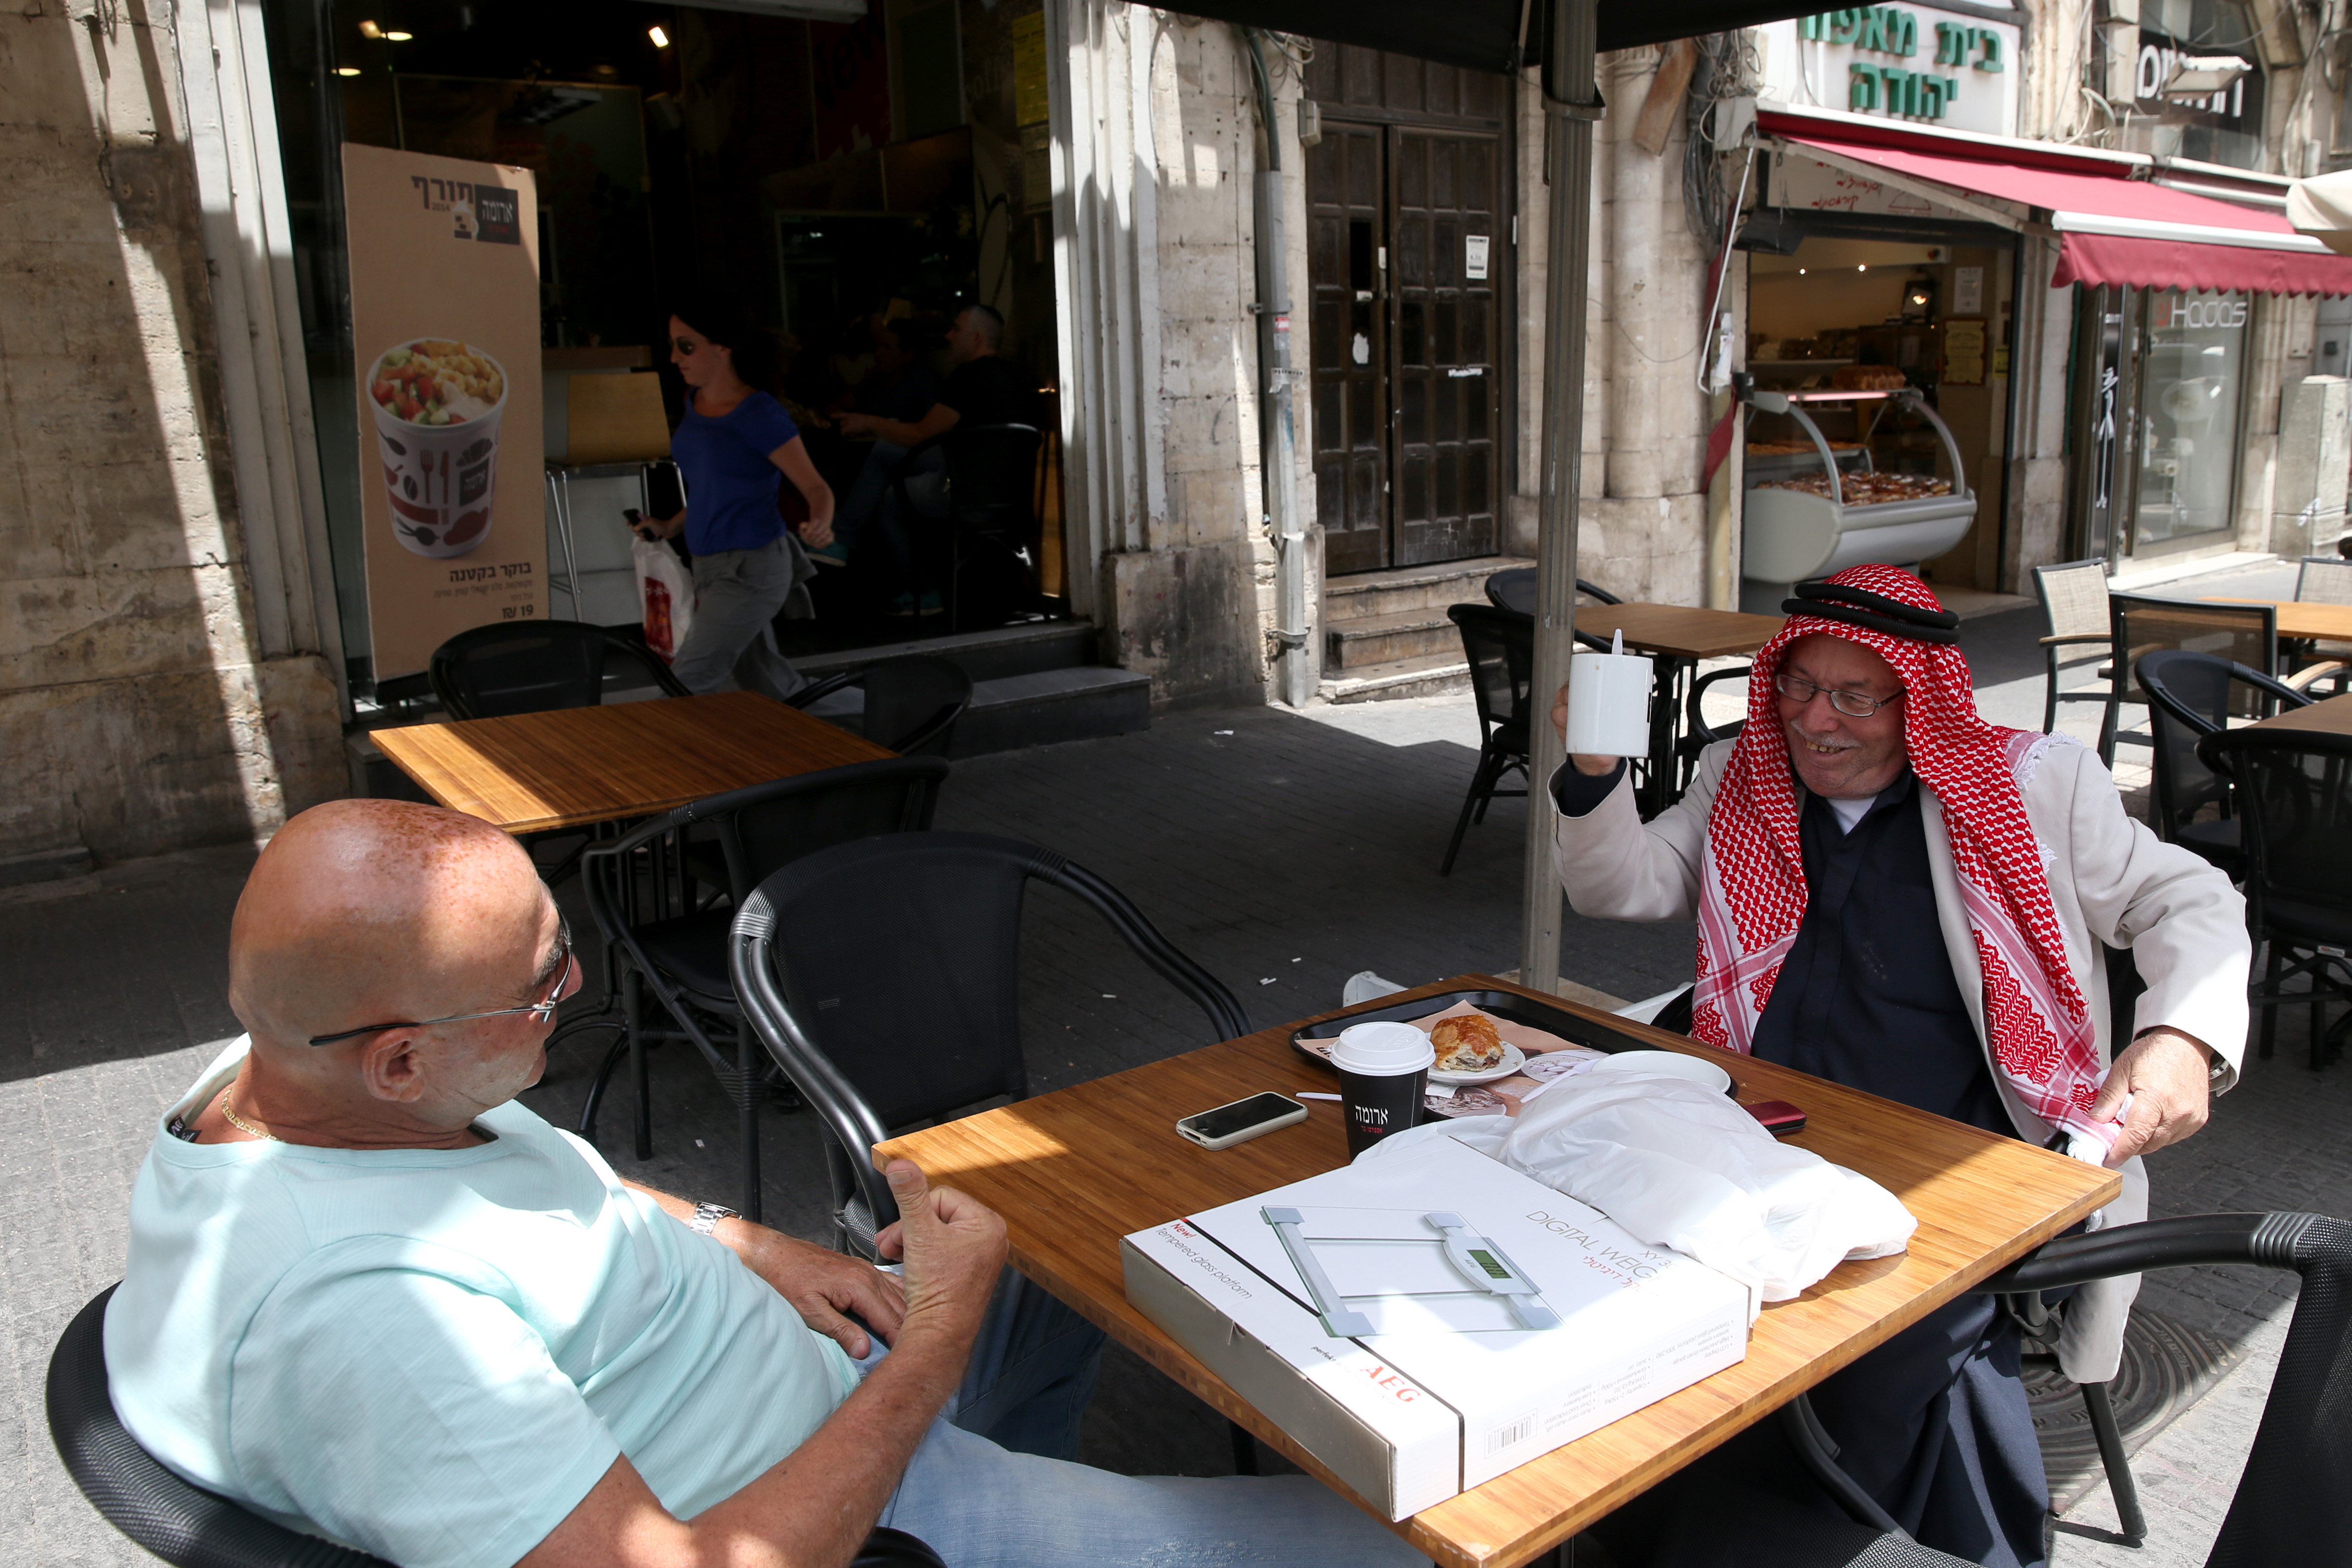 Actual coexistence, with all its pleasures and flaws. A Jew and a Muslim sitting together in a coffee shop. Photo: Nati Shohat/Flash 90